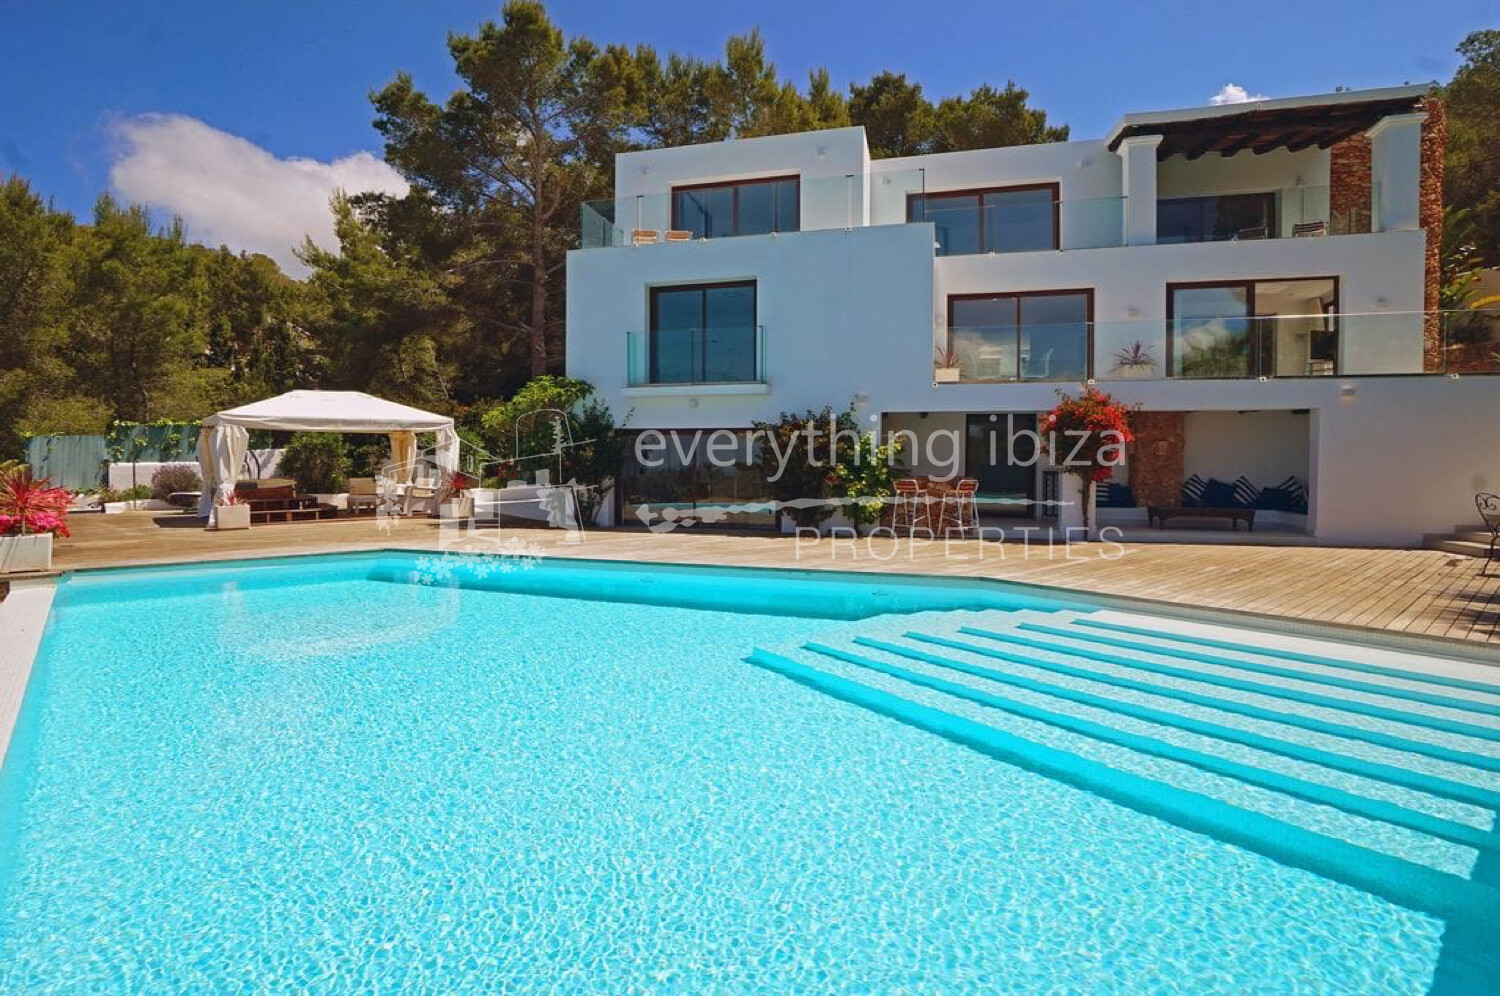 Magnificent Villa with Sea Views Close to Cala Salada, ref. 1439, for sale in Ibiza by everything ibiza Properties